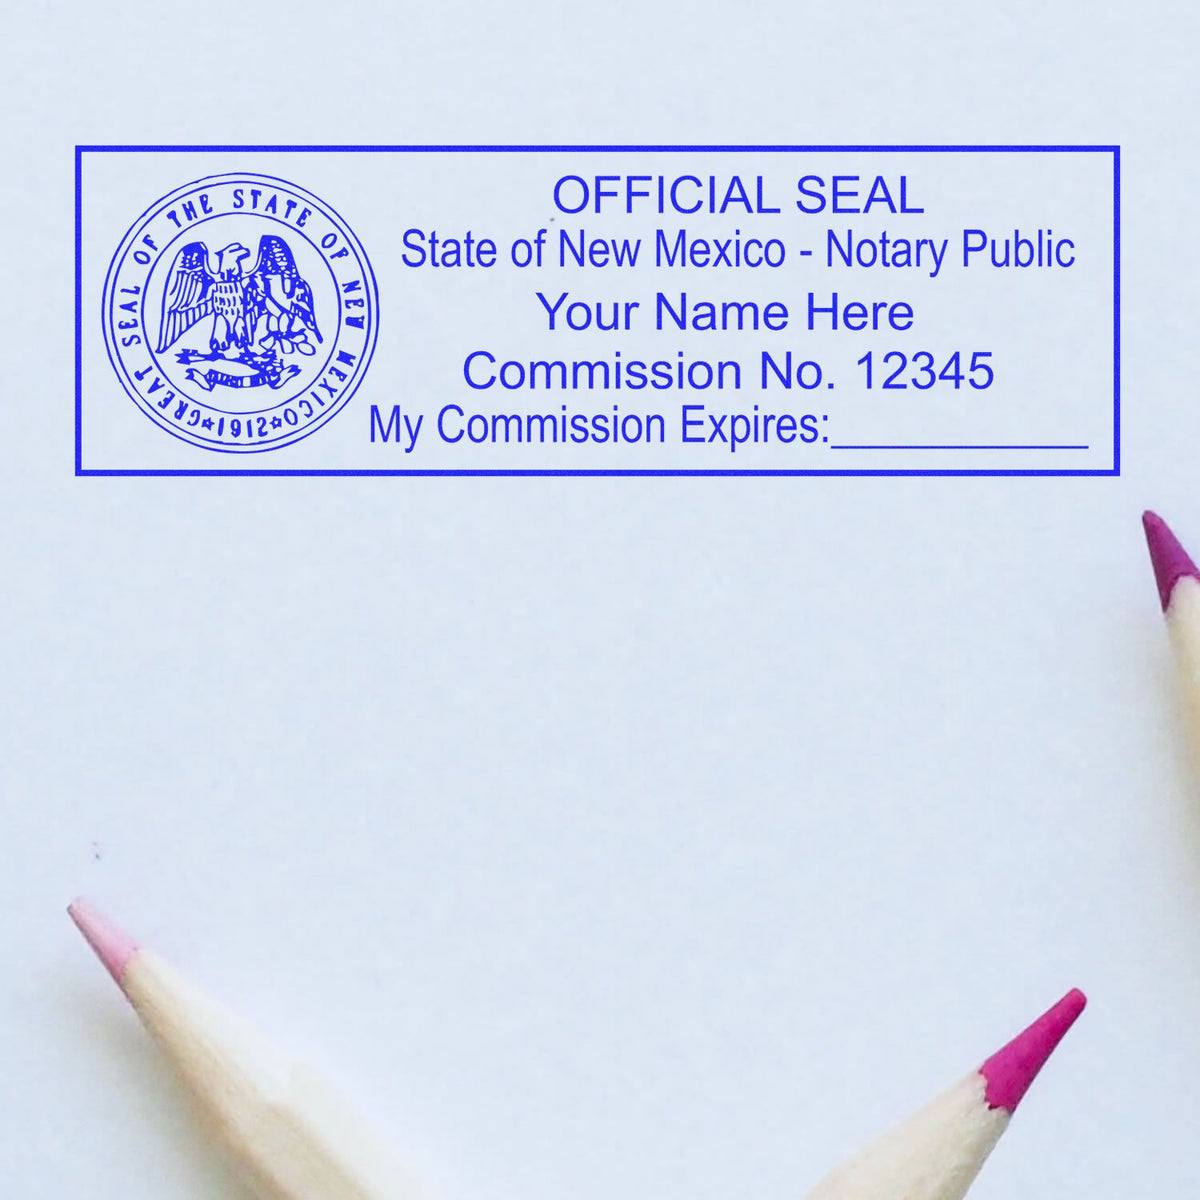 An alternative view of the Super Slim New Mexico Notary Public Stamp stamped on a sheet of paper showing the image in use